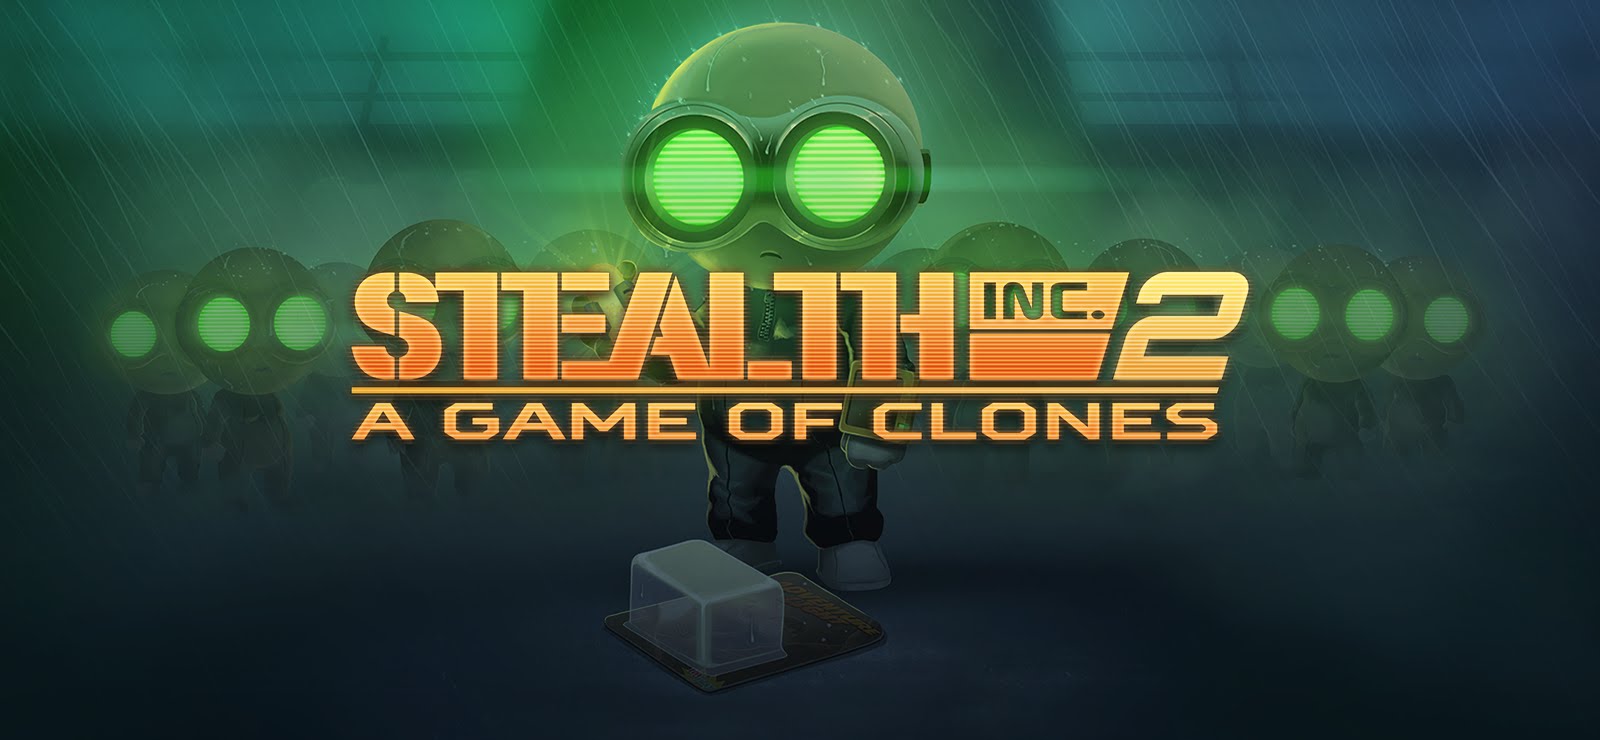 Stealth Inc. 2 A Game Of Clones #12